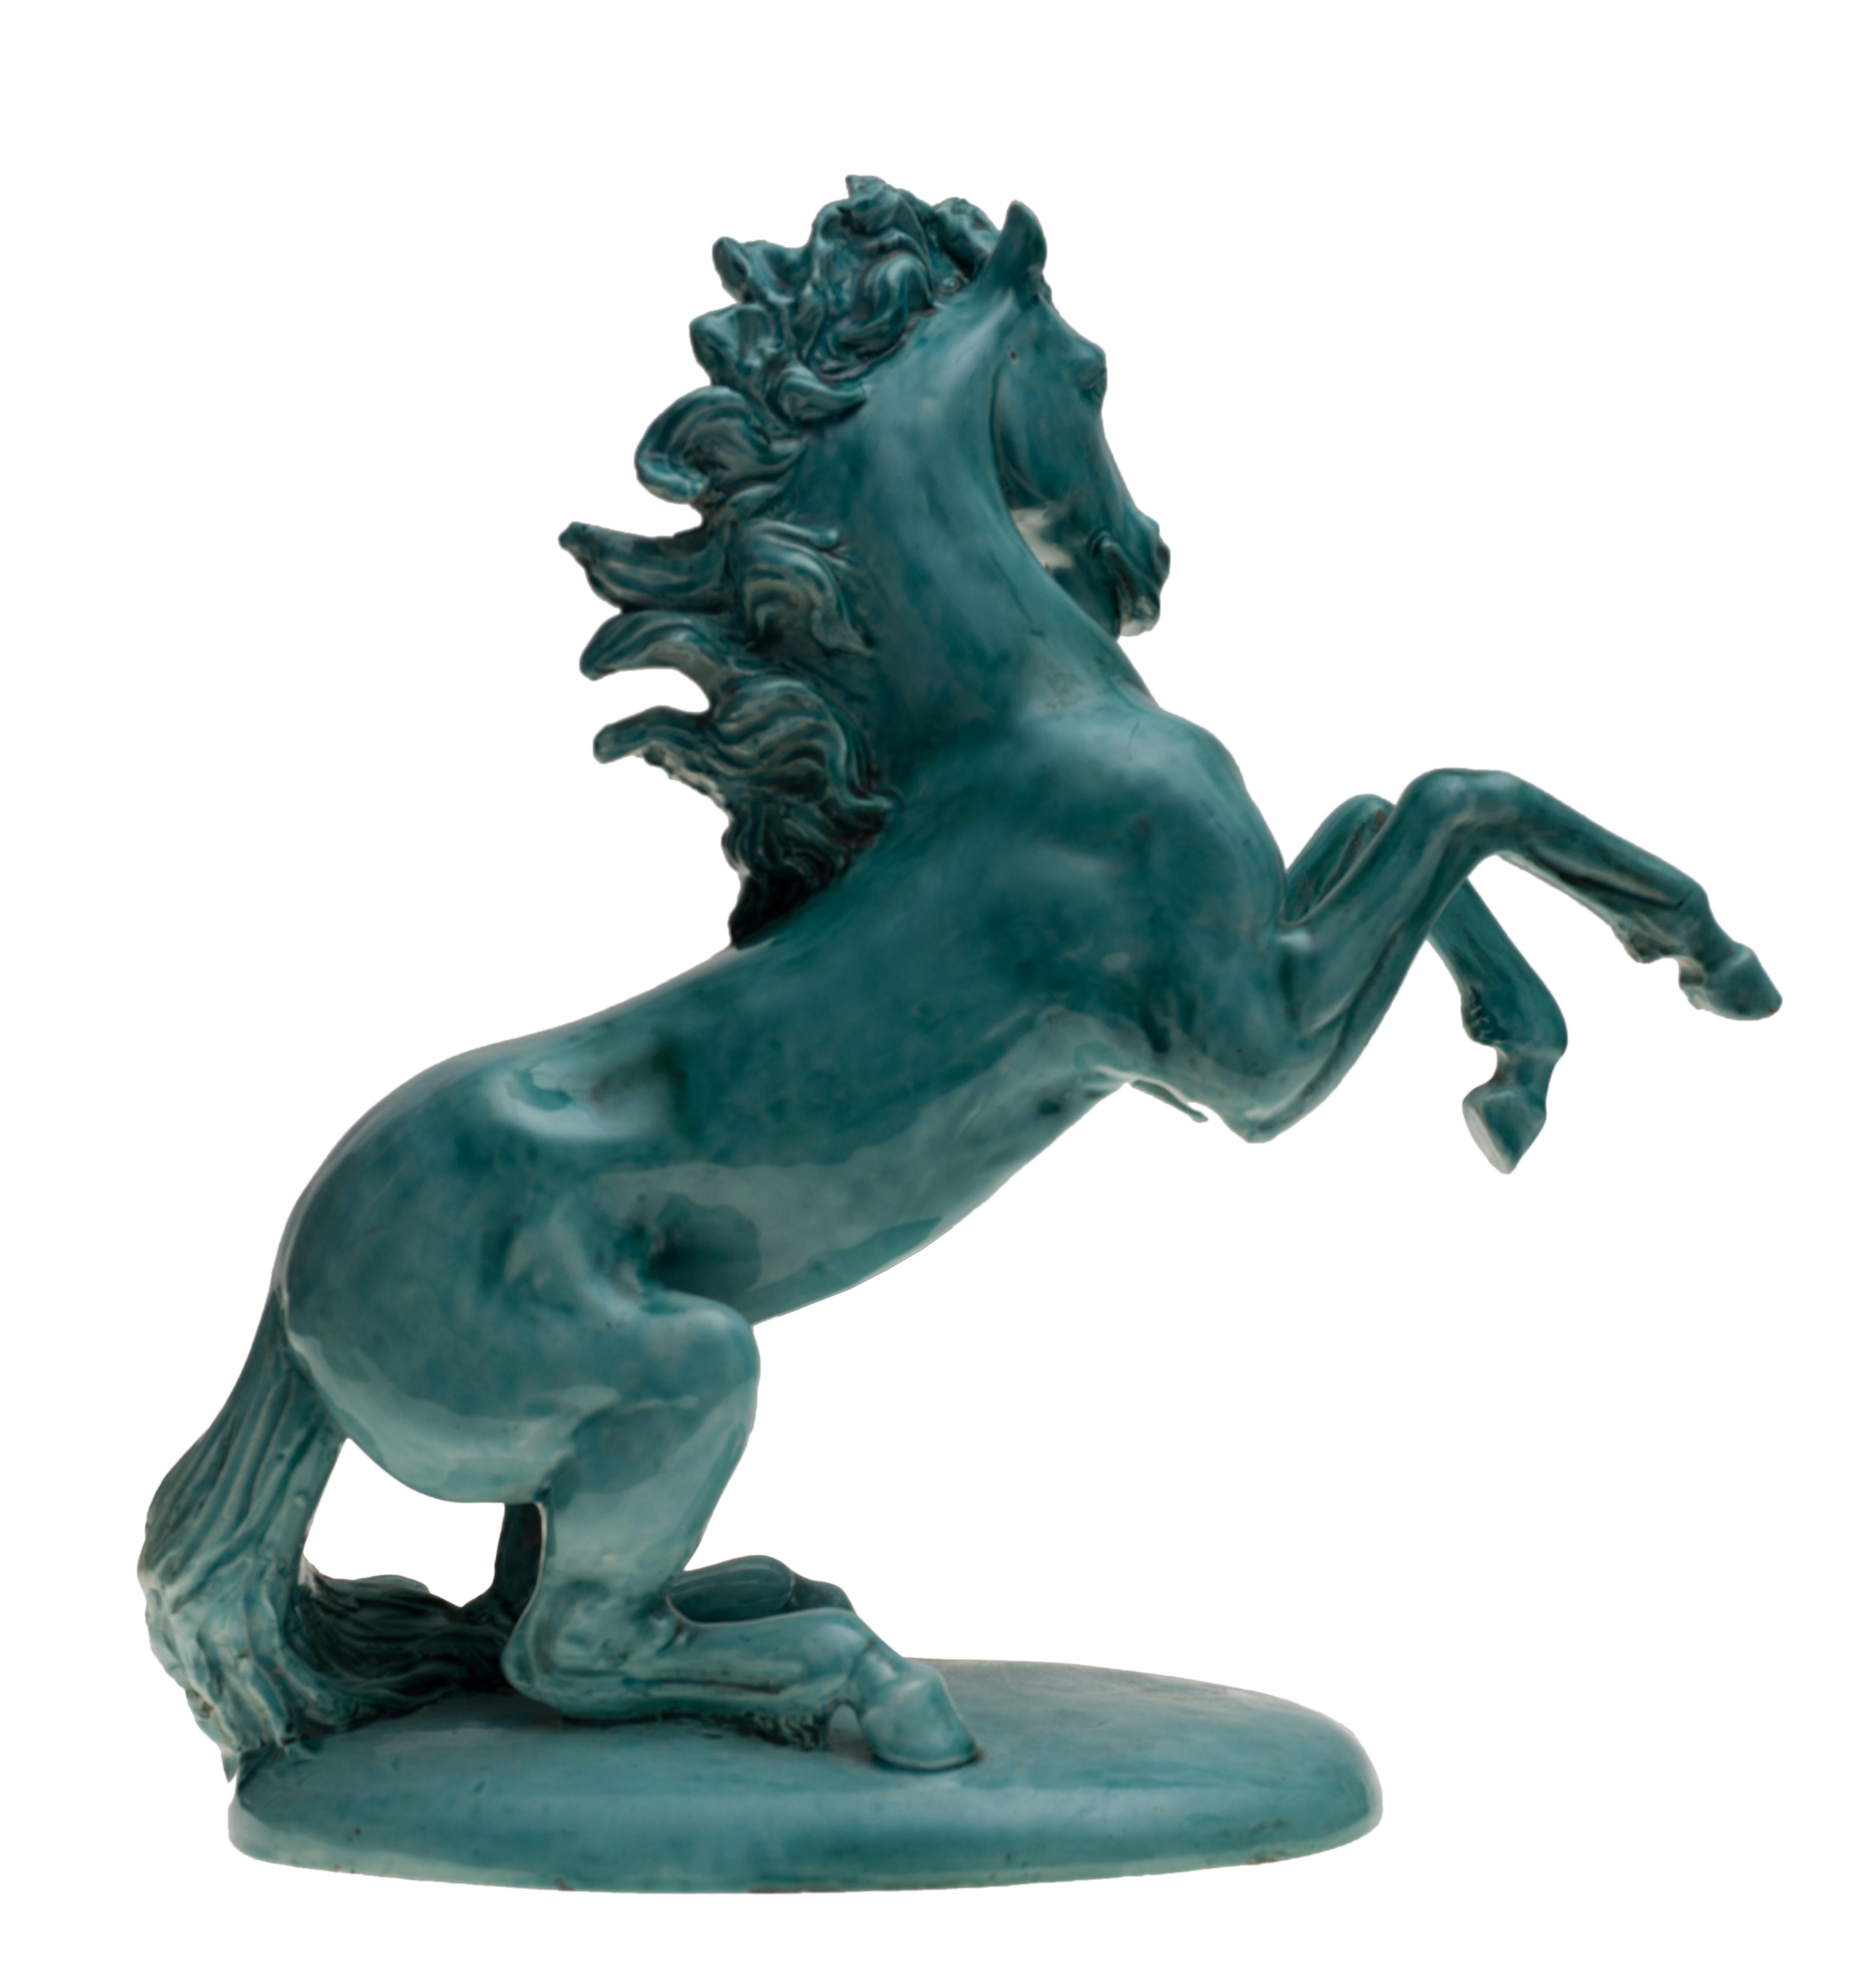 This vintage horse sculpture is an original modern artwork realized in 1927 by an Italian artist. Ceramic sculpture.

Signed “Misa 927” on the base.

The beautiful ceramic sculpture represents a majestic prancing horse.

This artwork is